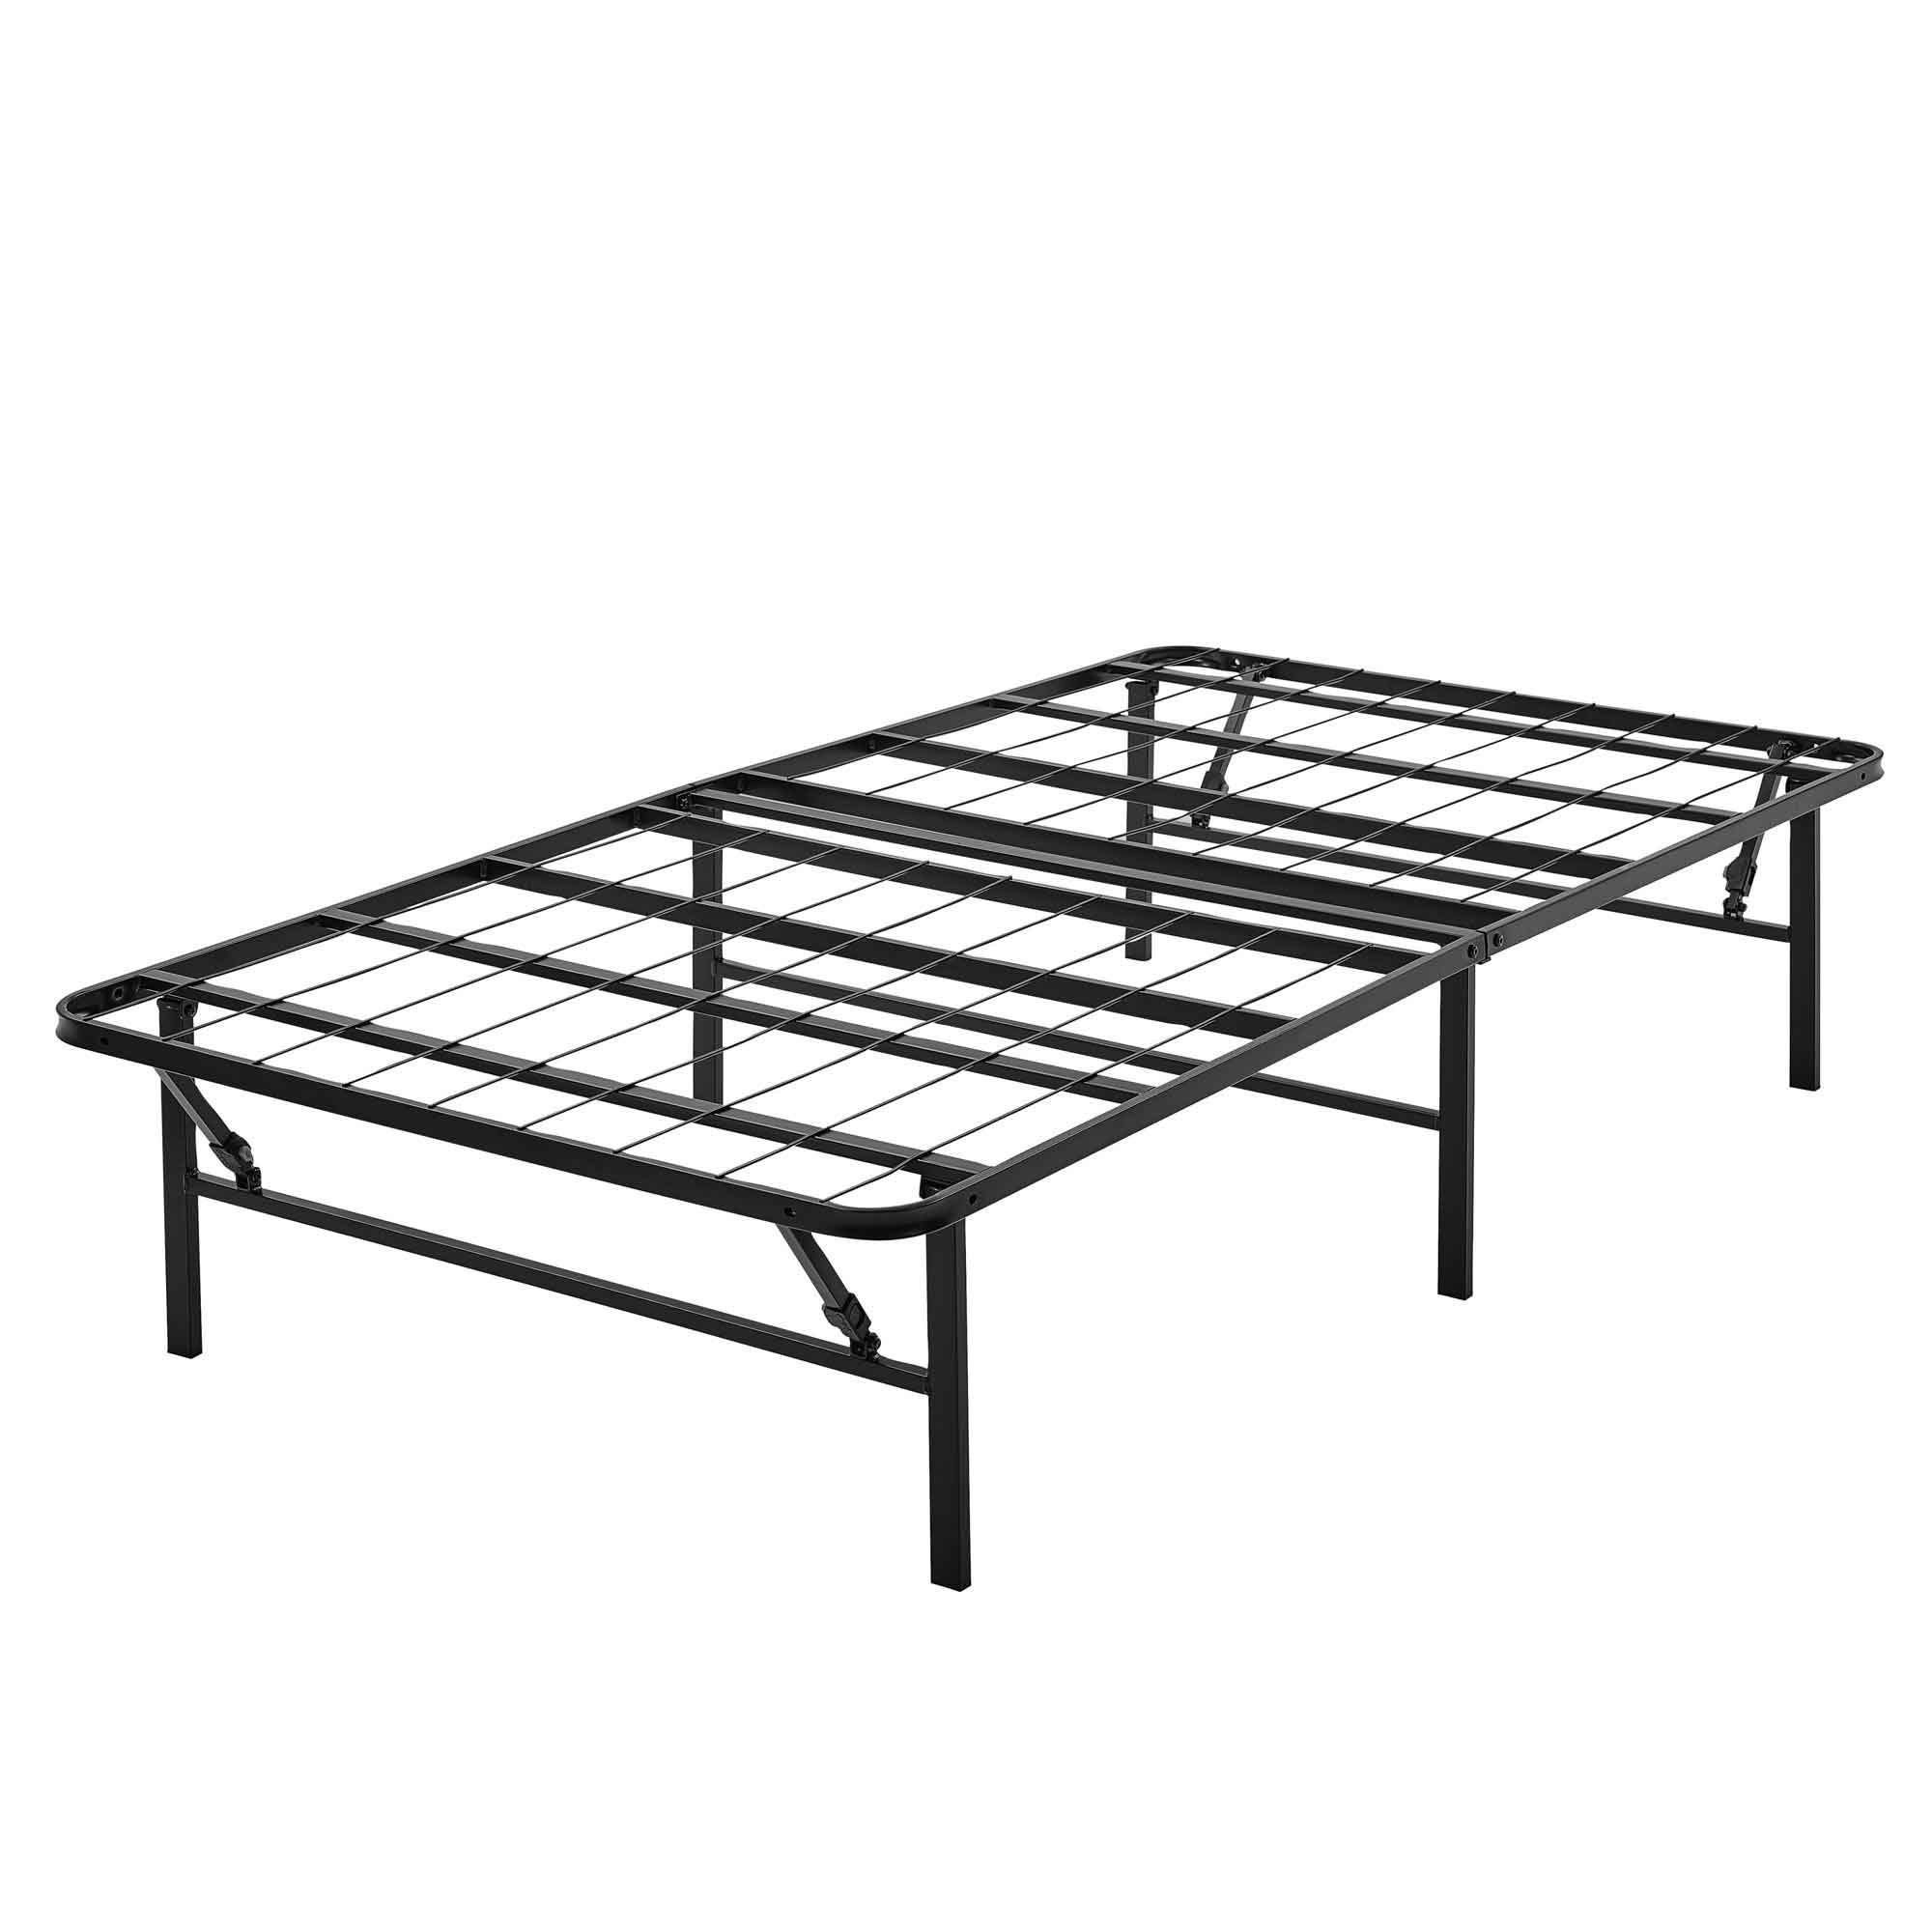 Mainstays 14 High Profile Foldable Steel Bed Frame Powder-coated Steel 